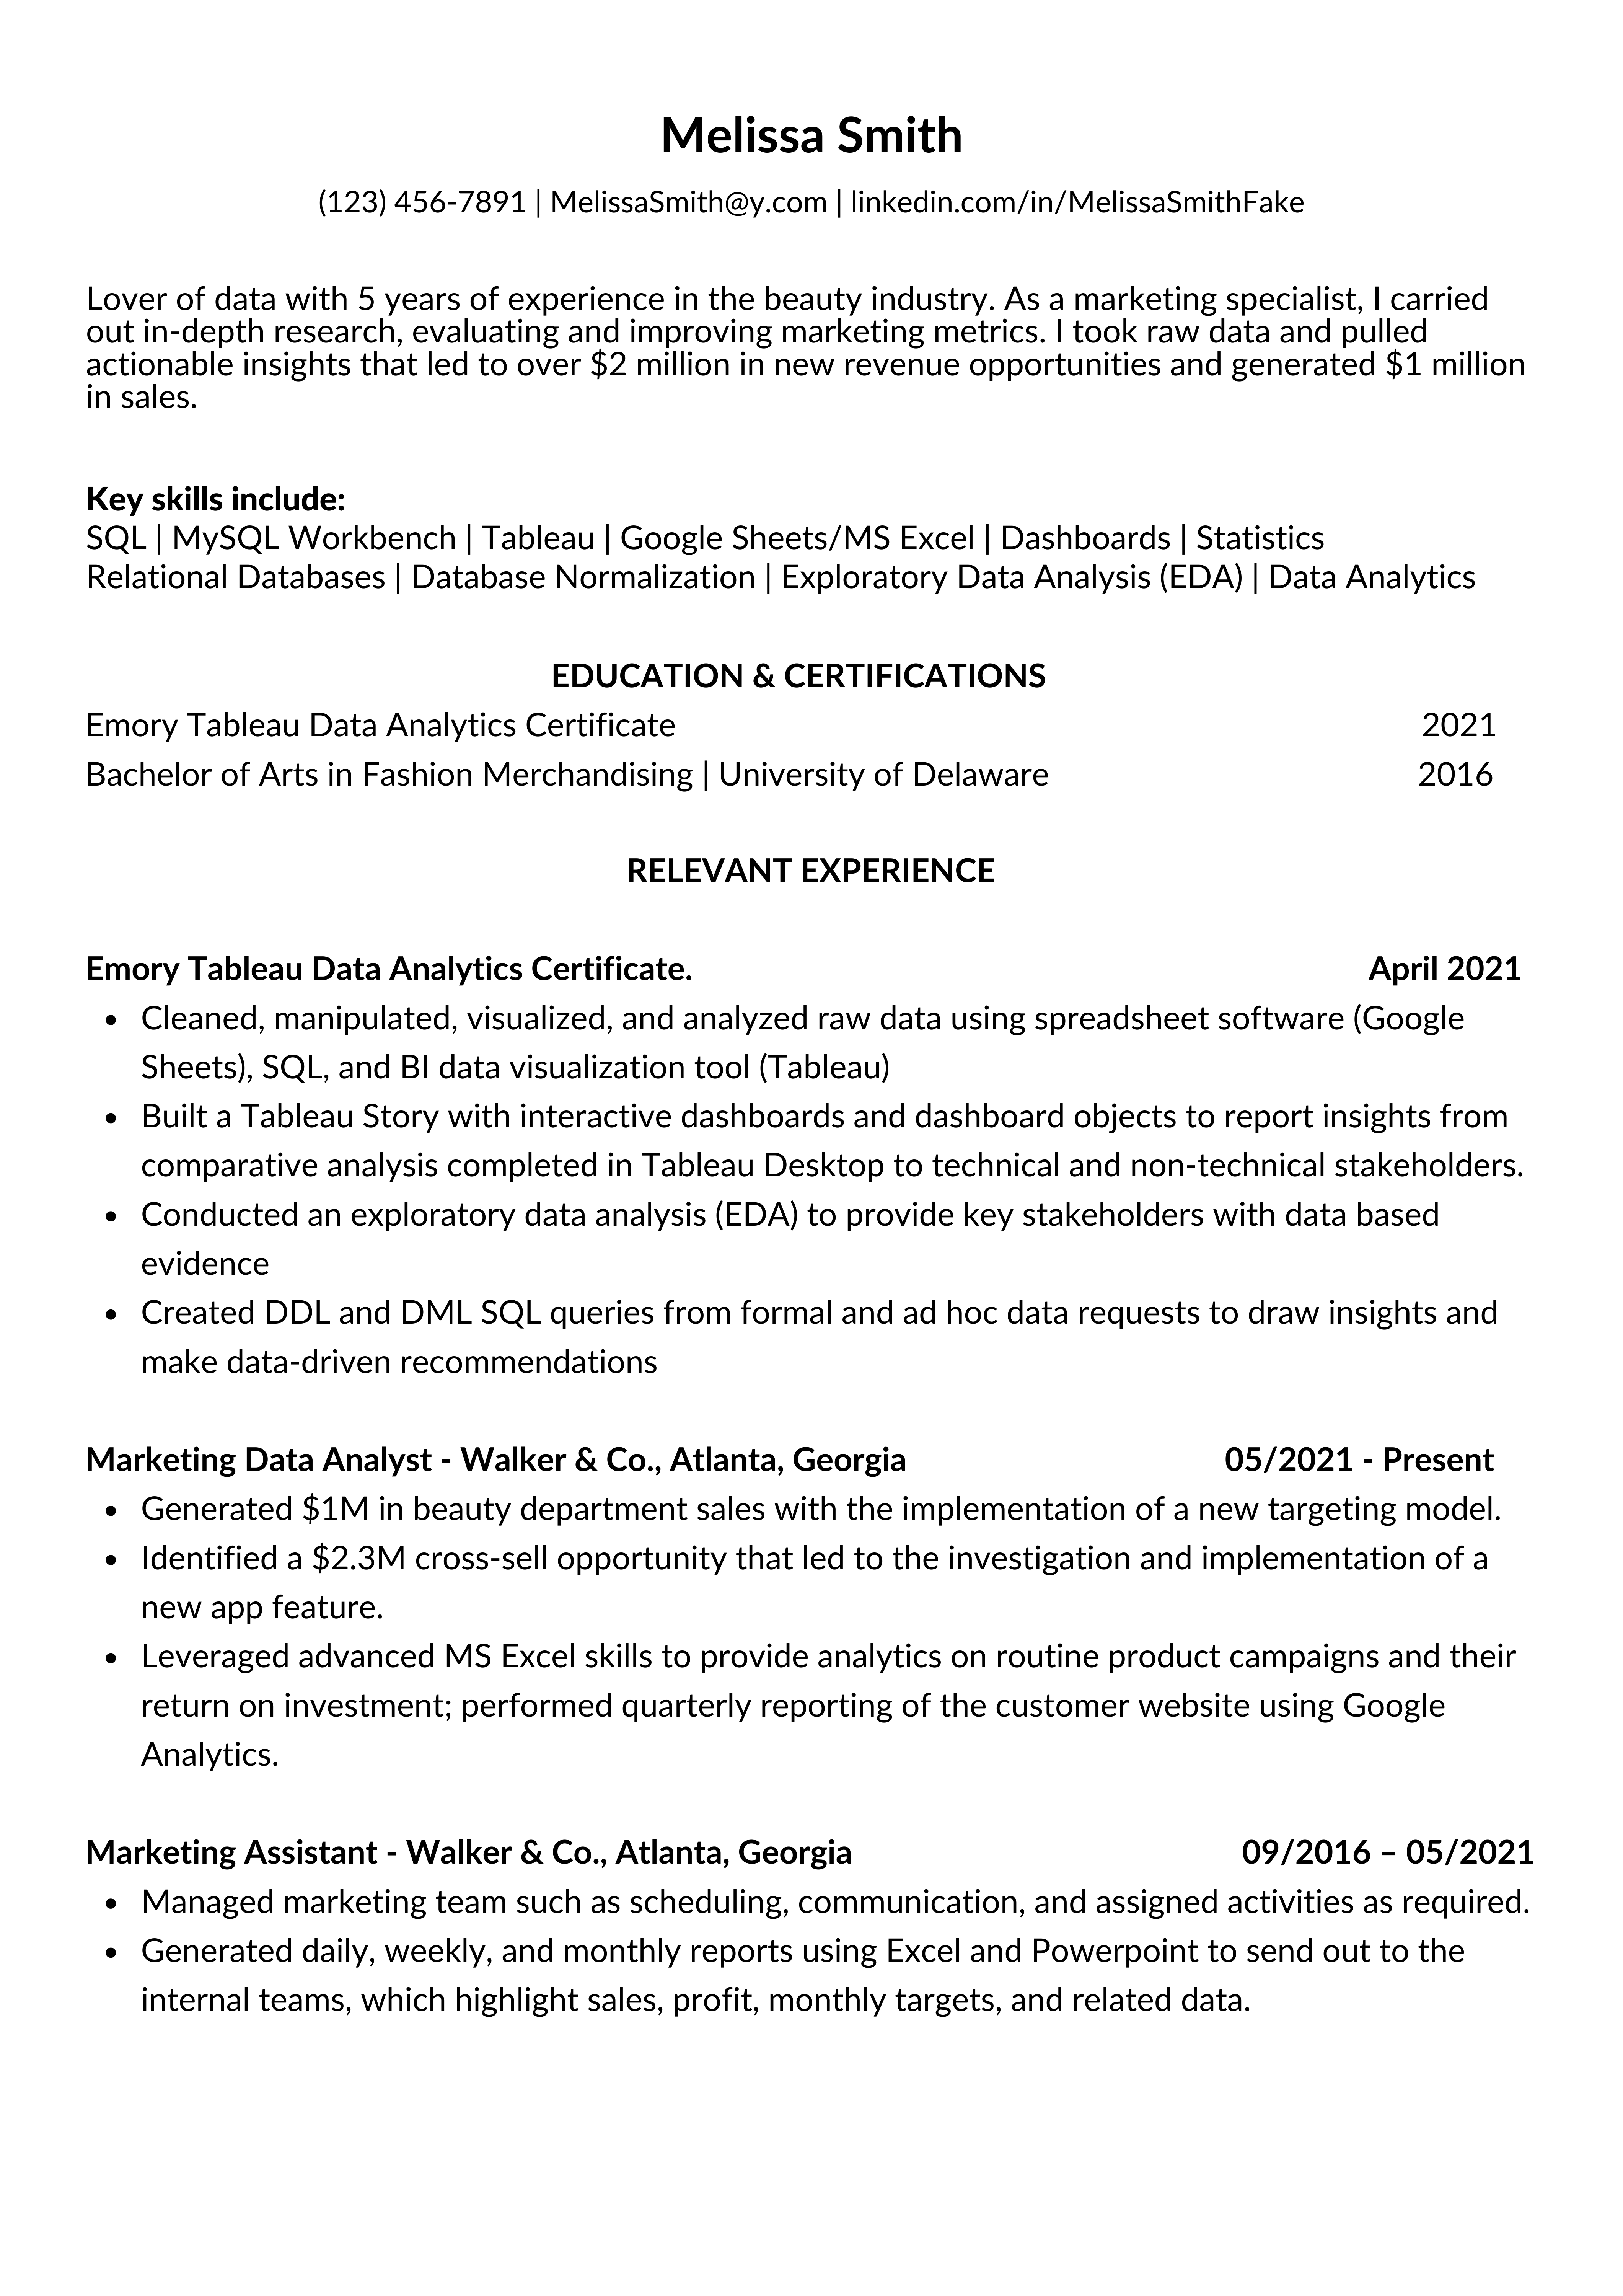 How to get an entry-level data analyst job with no experience or a ...